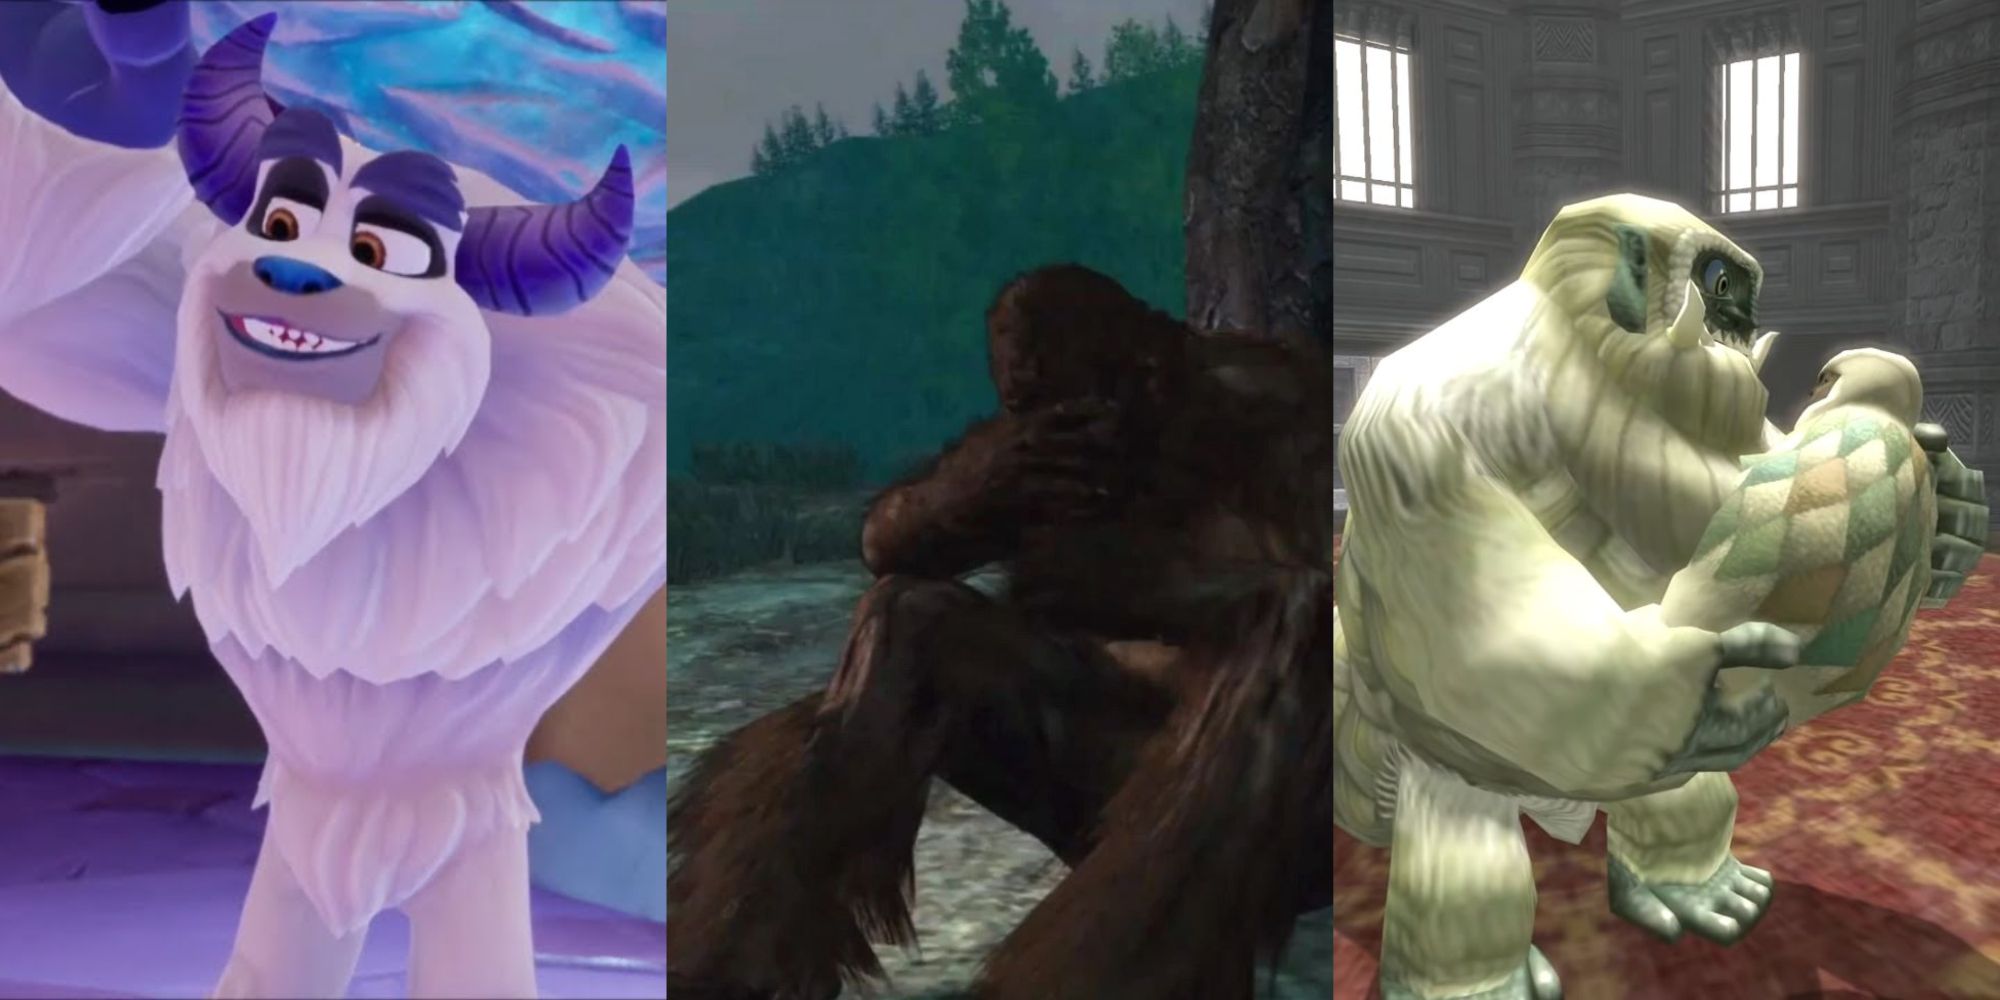 Bentley from Spyro, Sasquatch from Red Dead Redemption,  Yeto and Yeta from Legend of Zelda